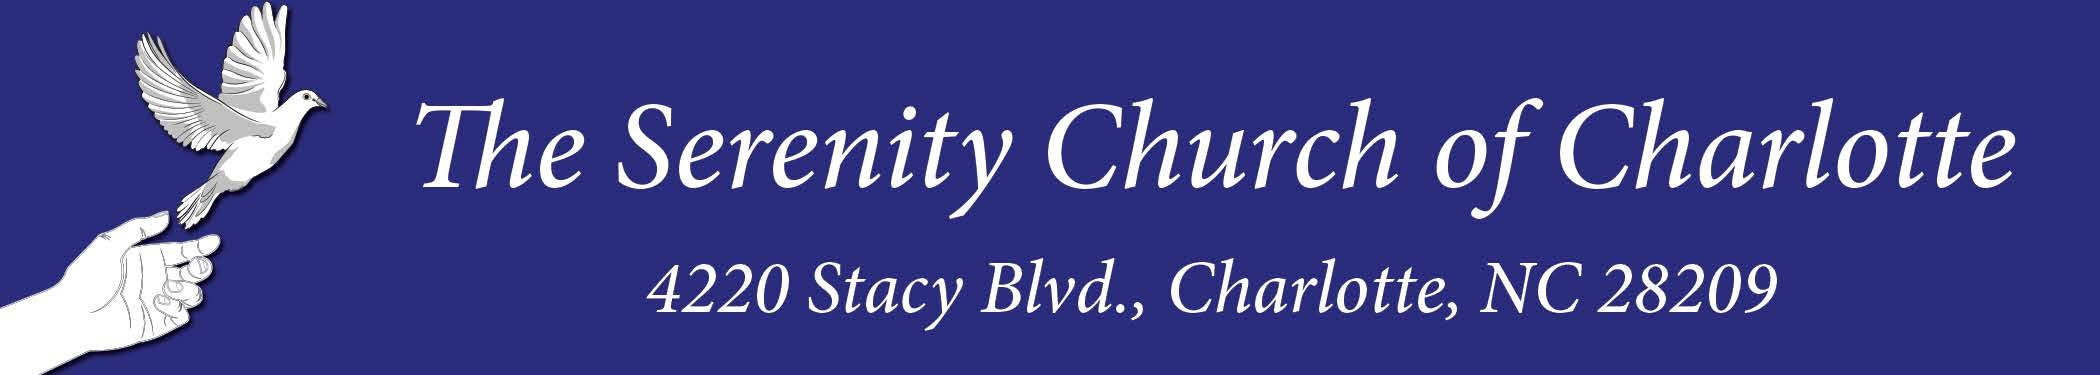 The Serenity Church of Charlotte